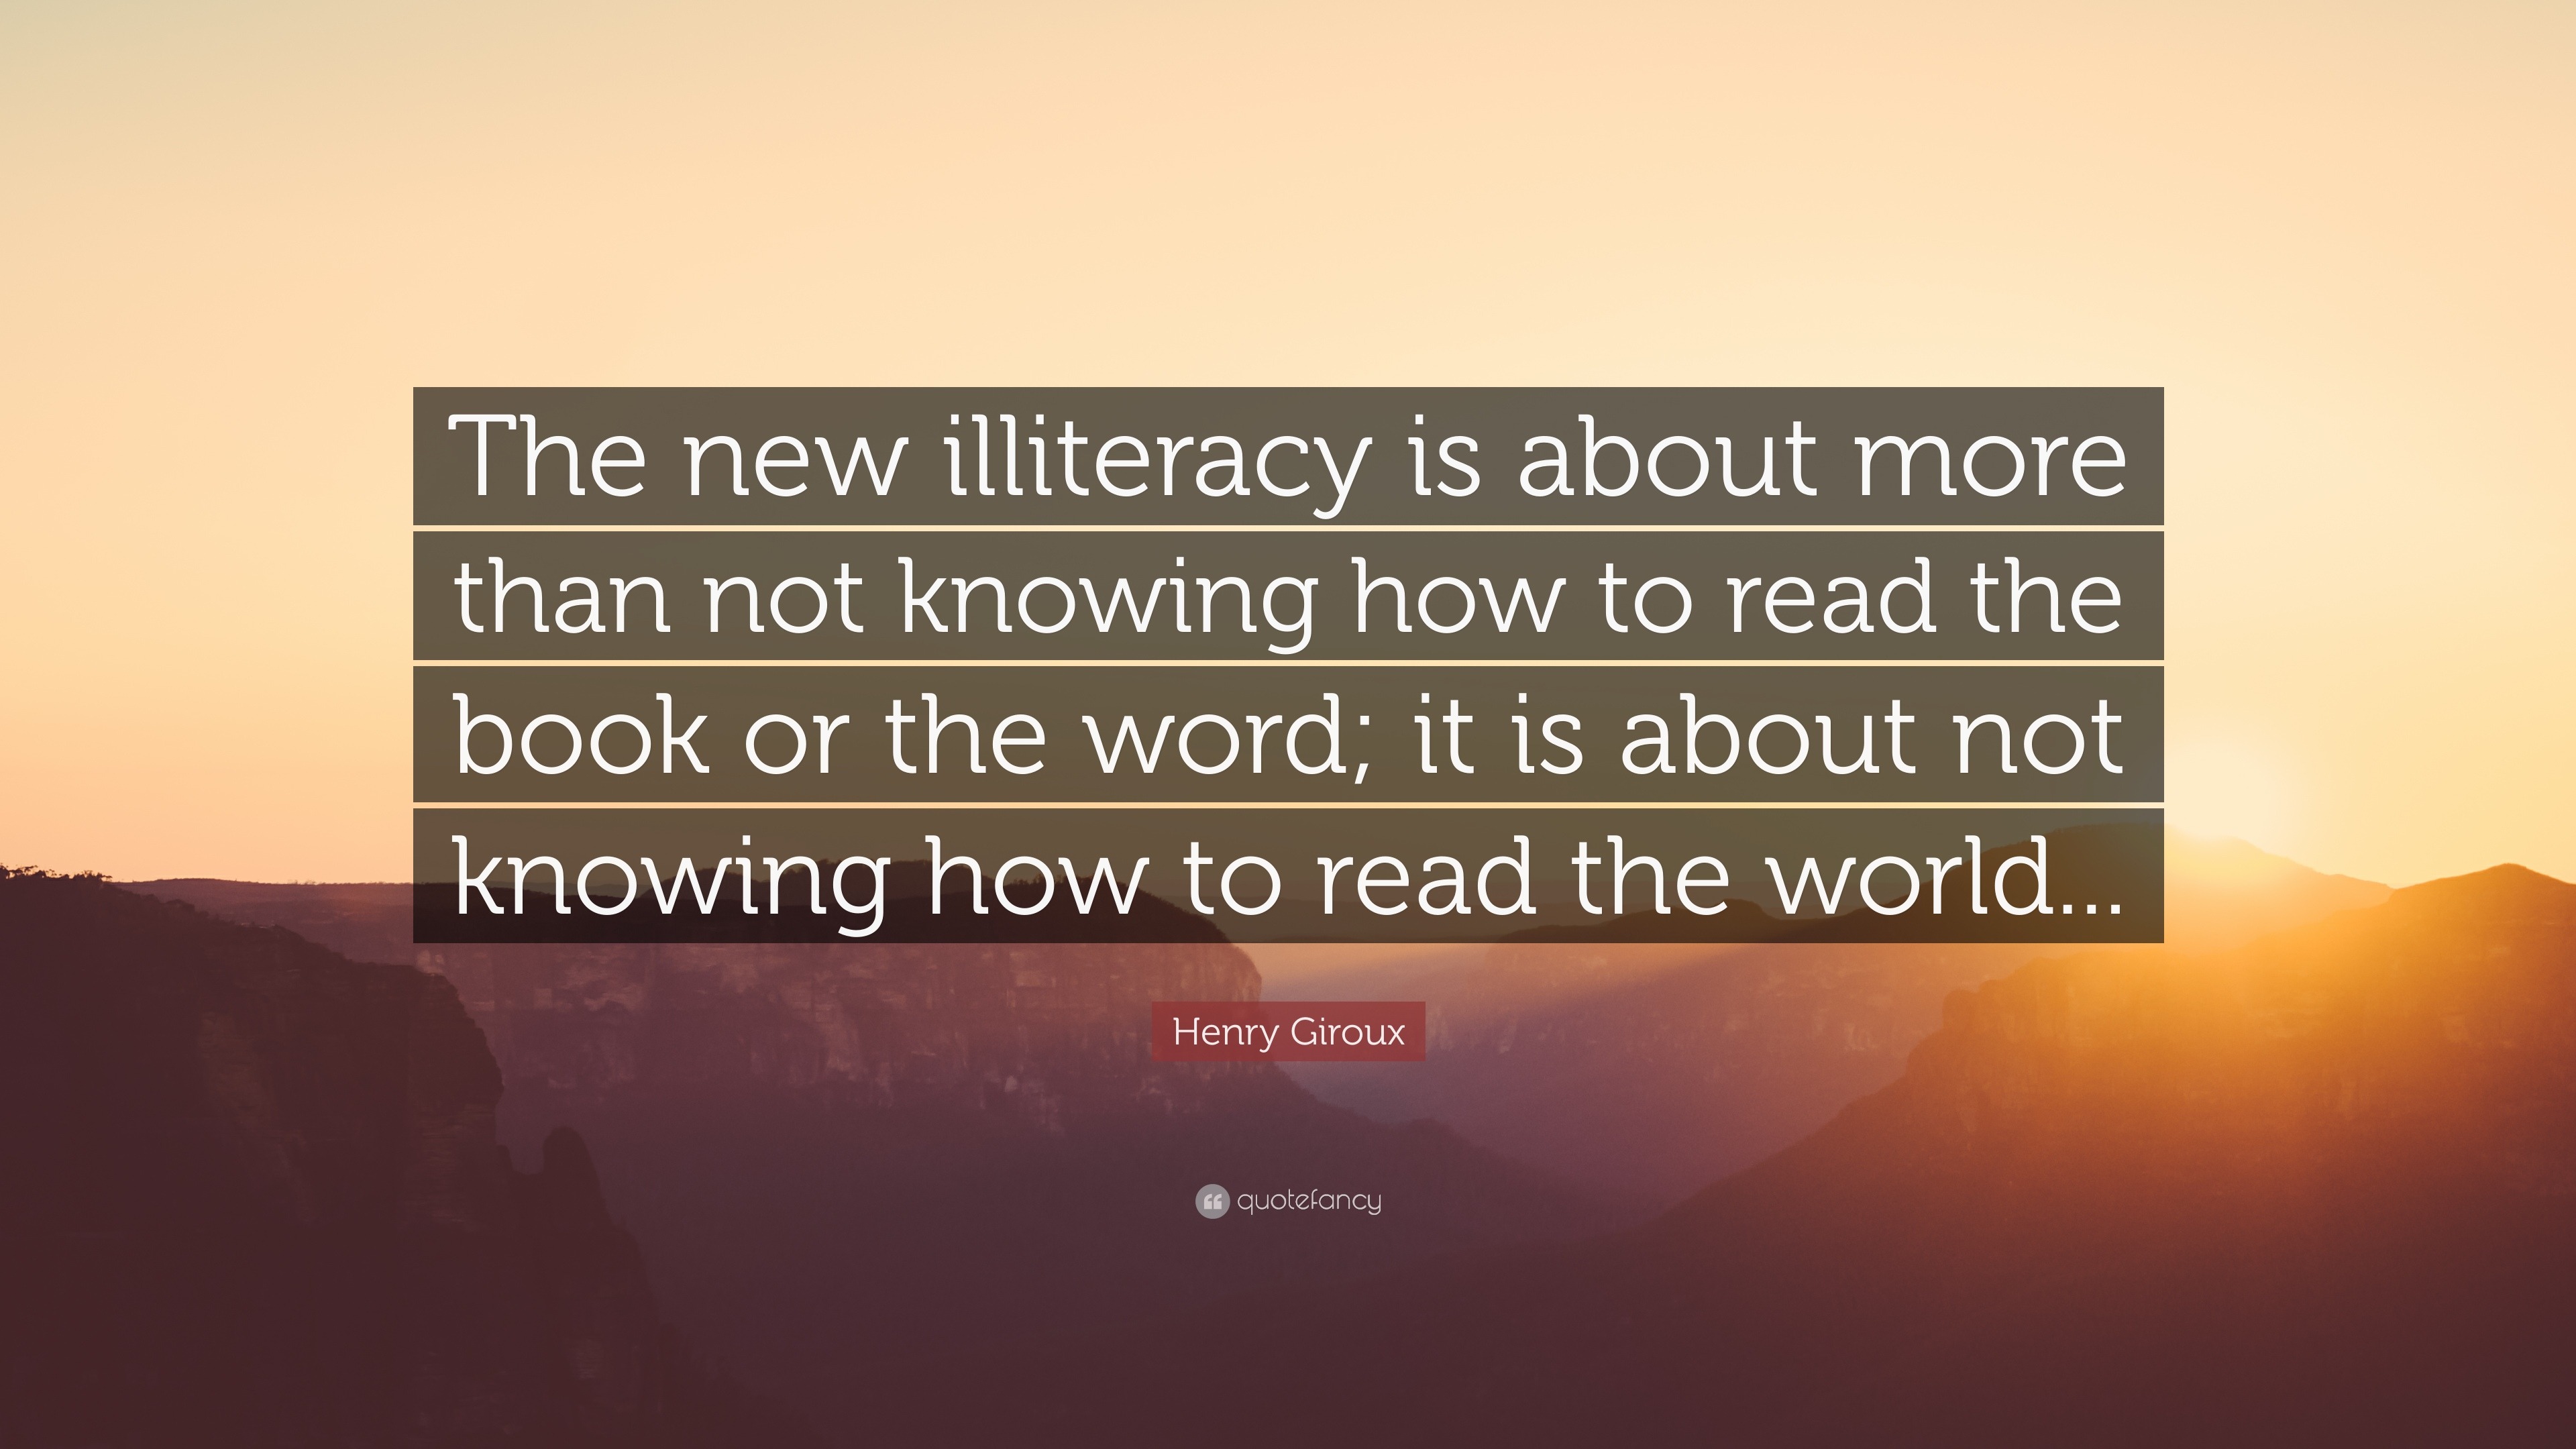 Henry Giroux Quote: “The new illiteracy is about more than not knowing